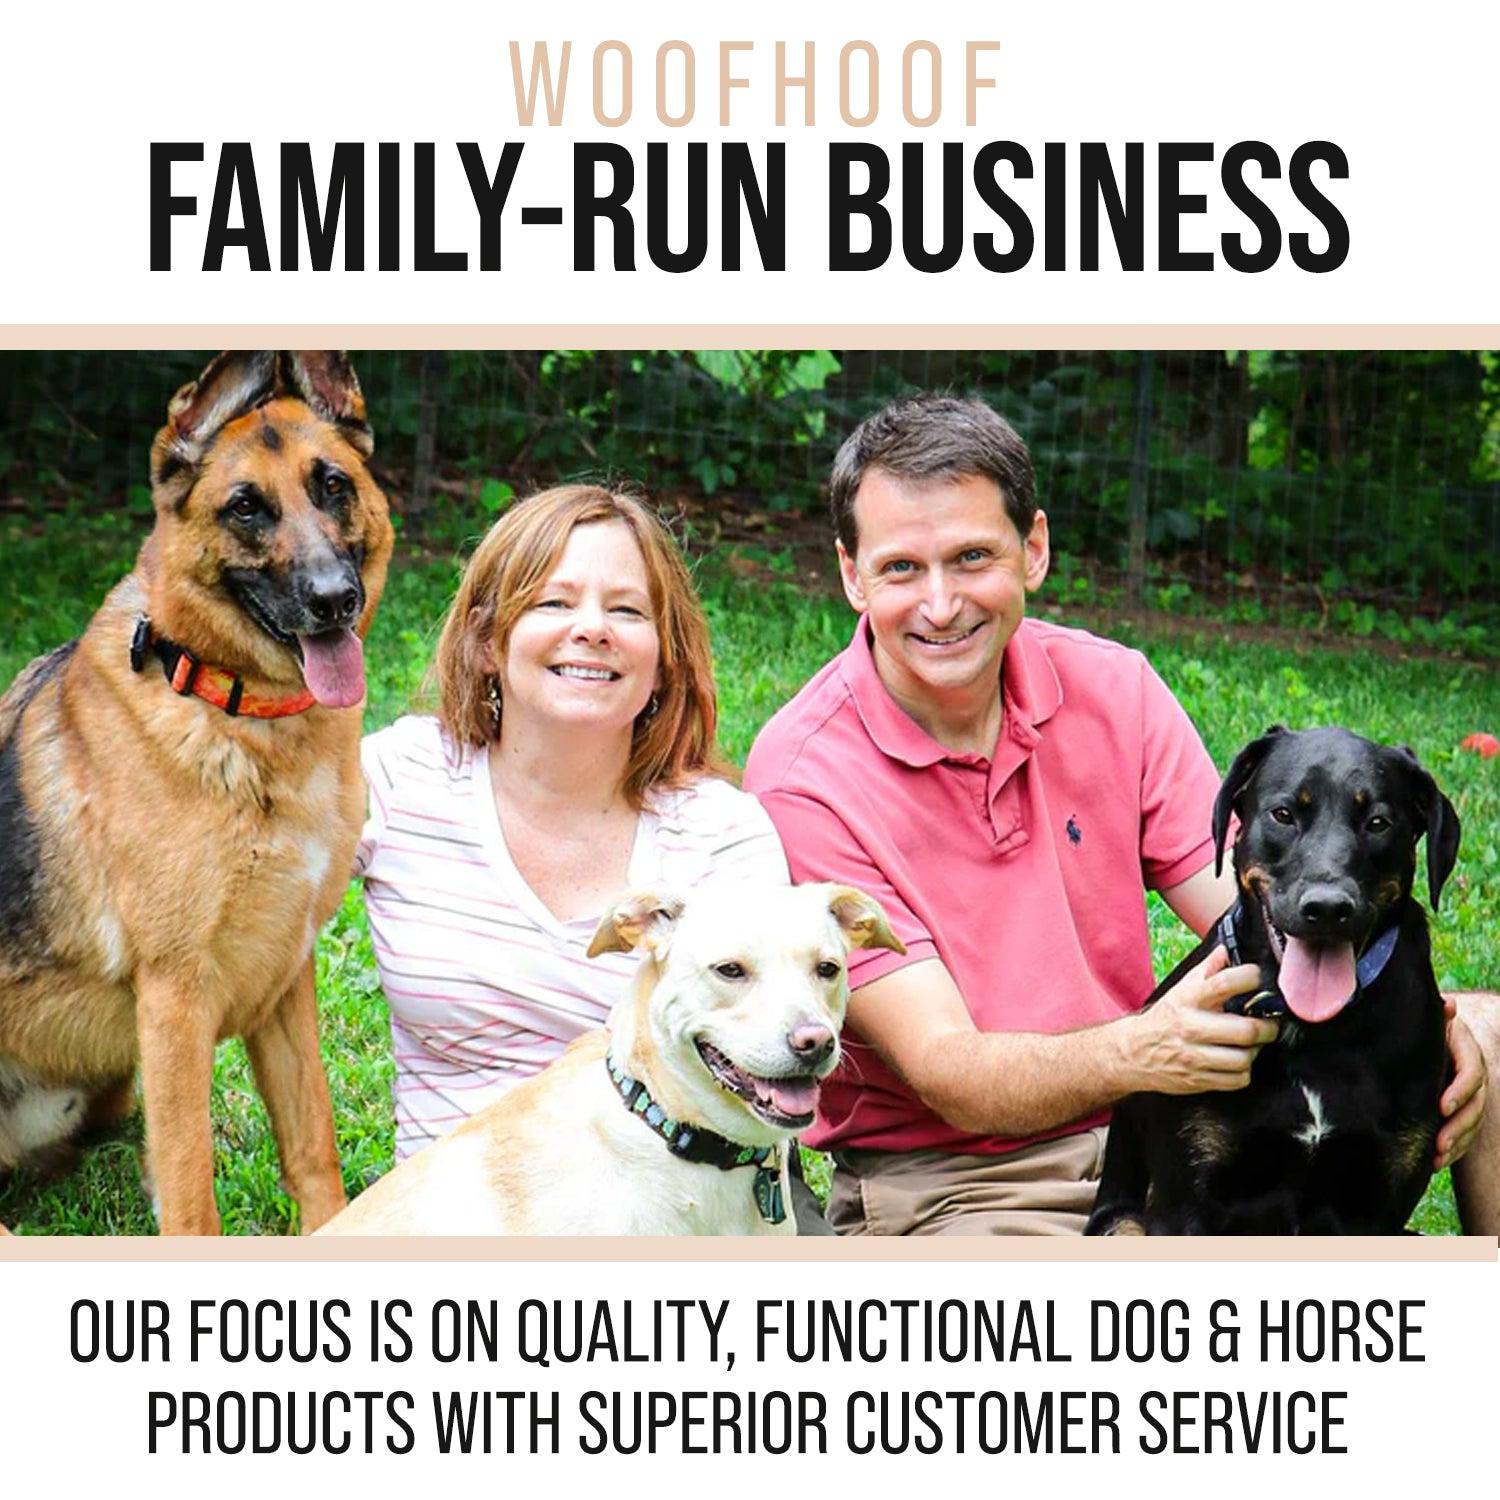 Woofhoof is a family run business - picture features business owners and three dogs